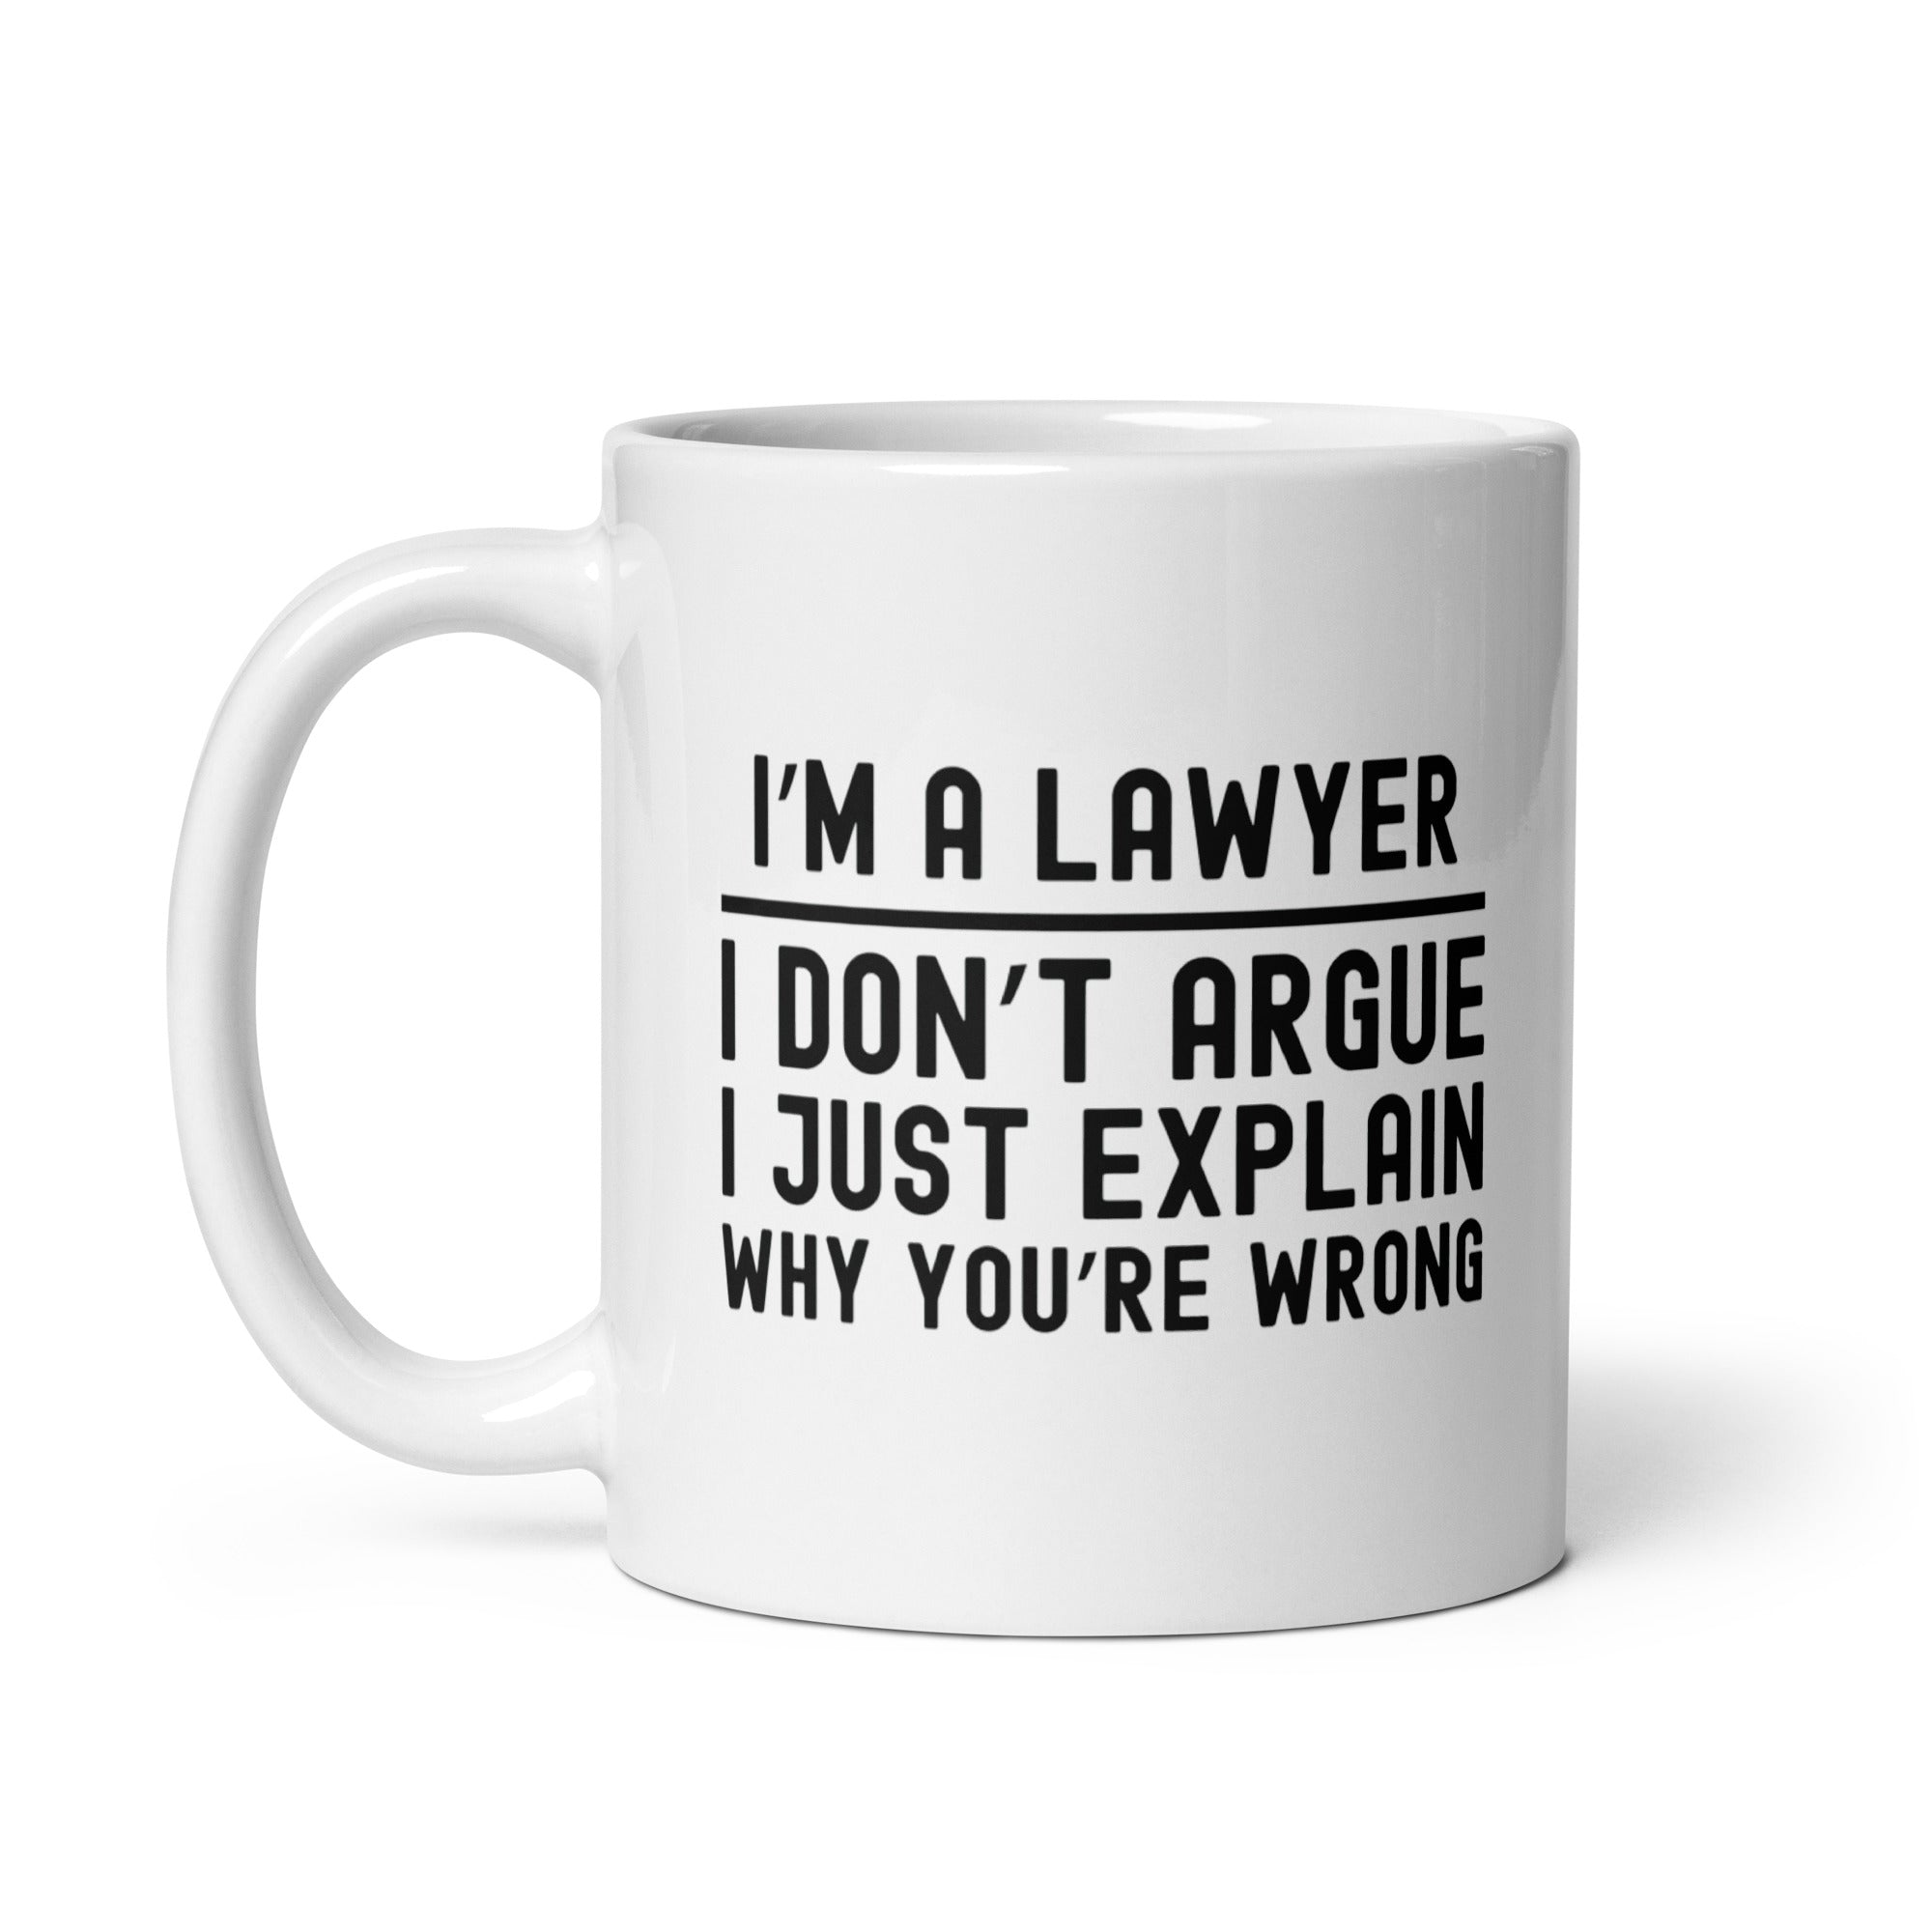 White glossy mug | I’m a lawyer, I don’t argue, I just explain why you’re wrong